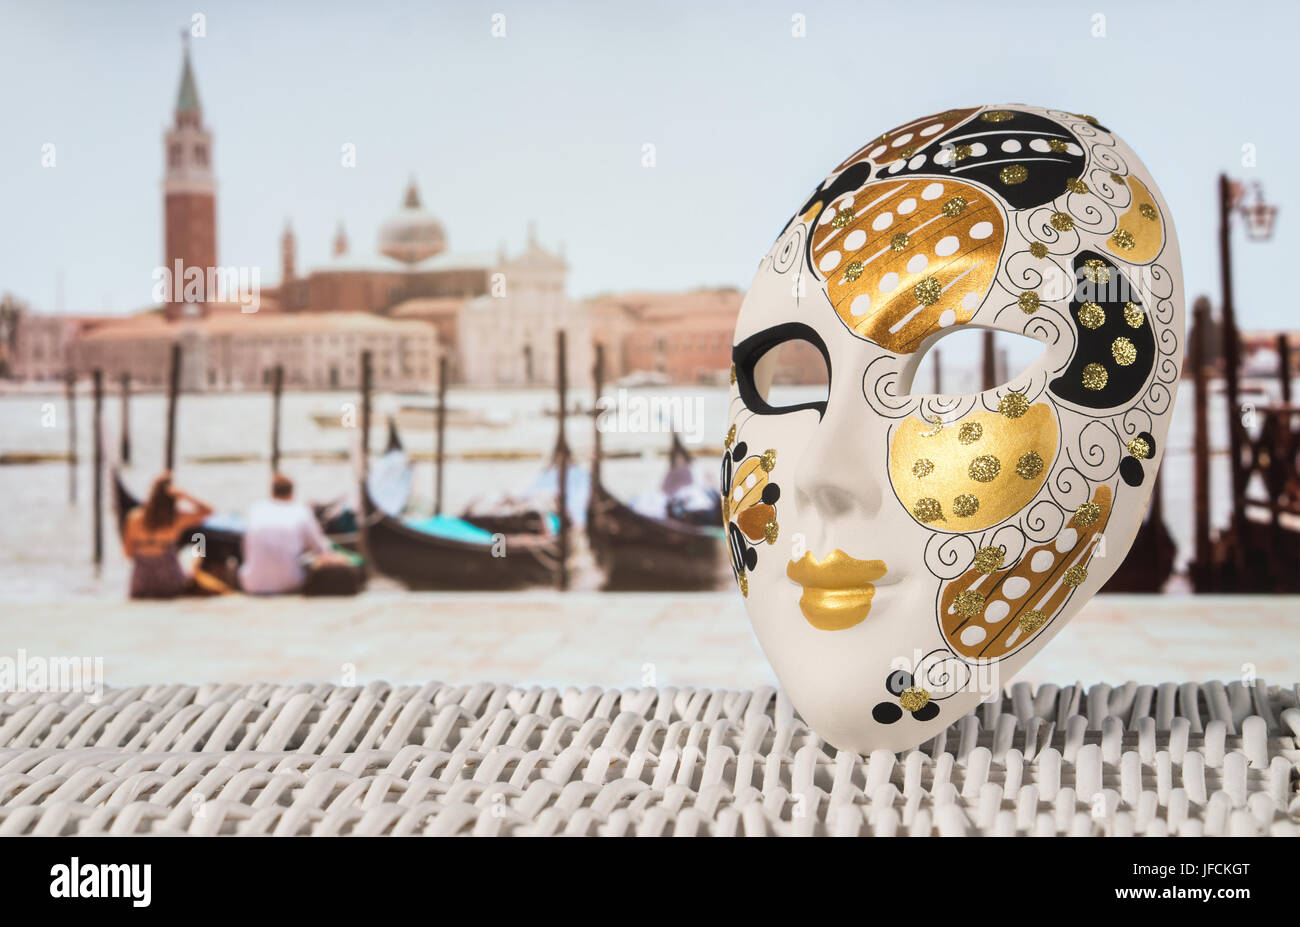 Traditional Venetian Mask with moored gondolas, romantic couple and San Giorgio Maggiore church in the blurred background. Hot summer holiday feeling Stock Photo